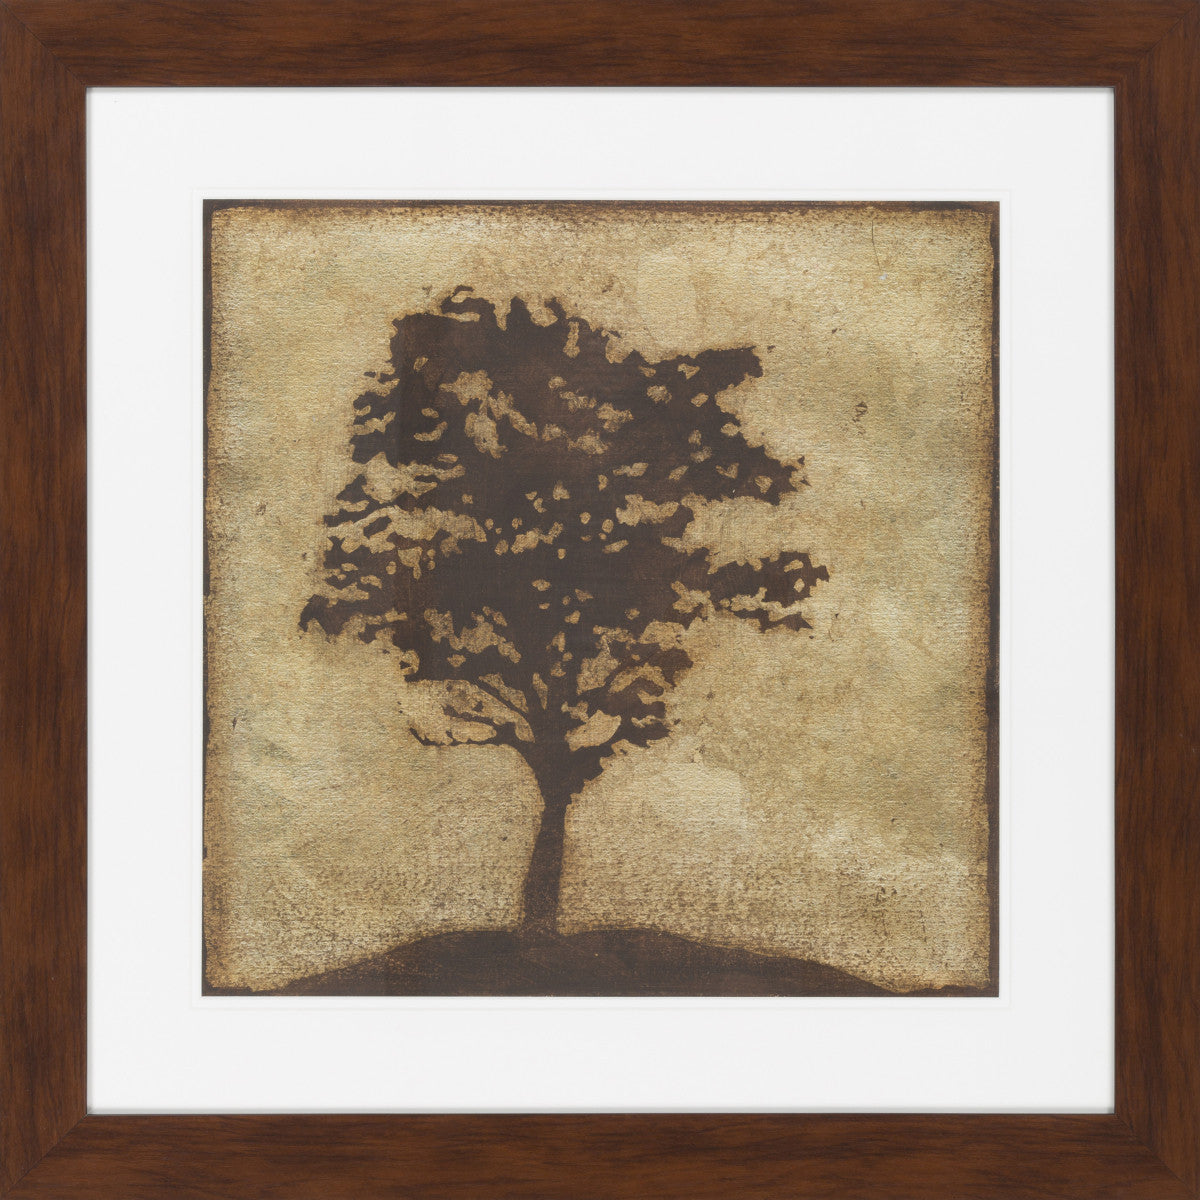 Surya Wall Decor LJ-4010 Brown by Megan Meagher main image